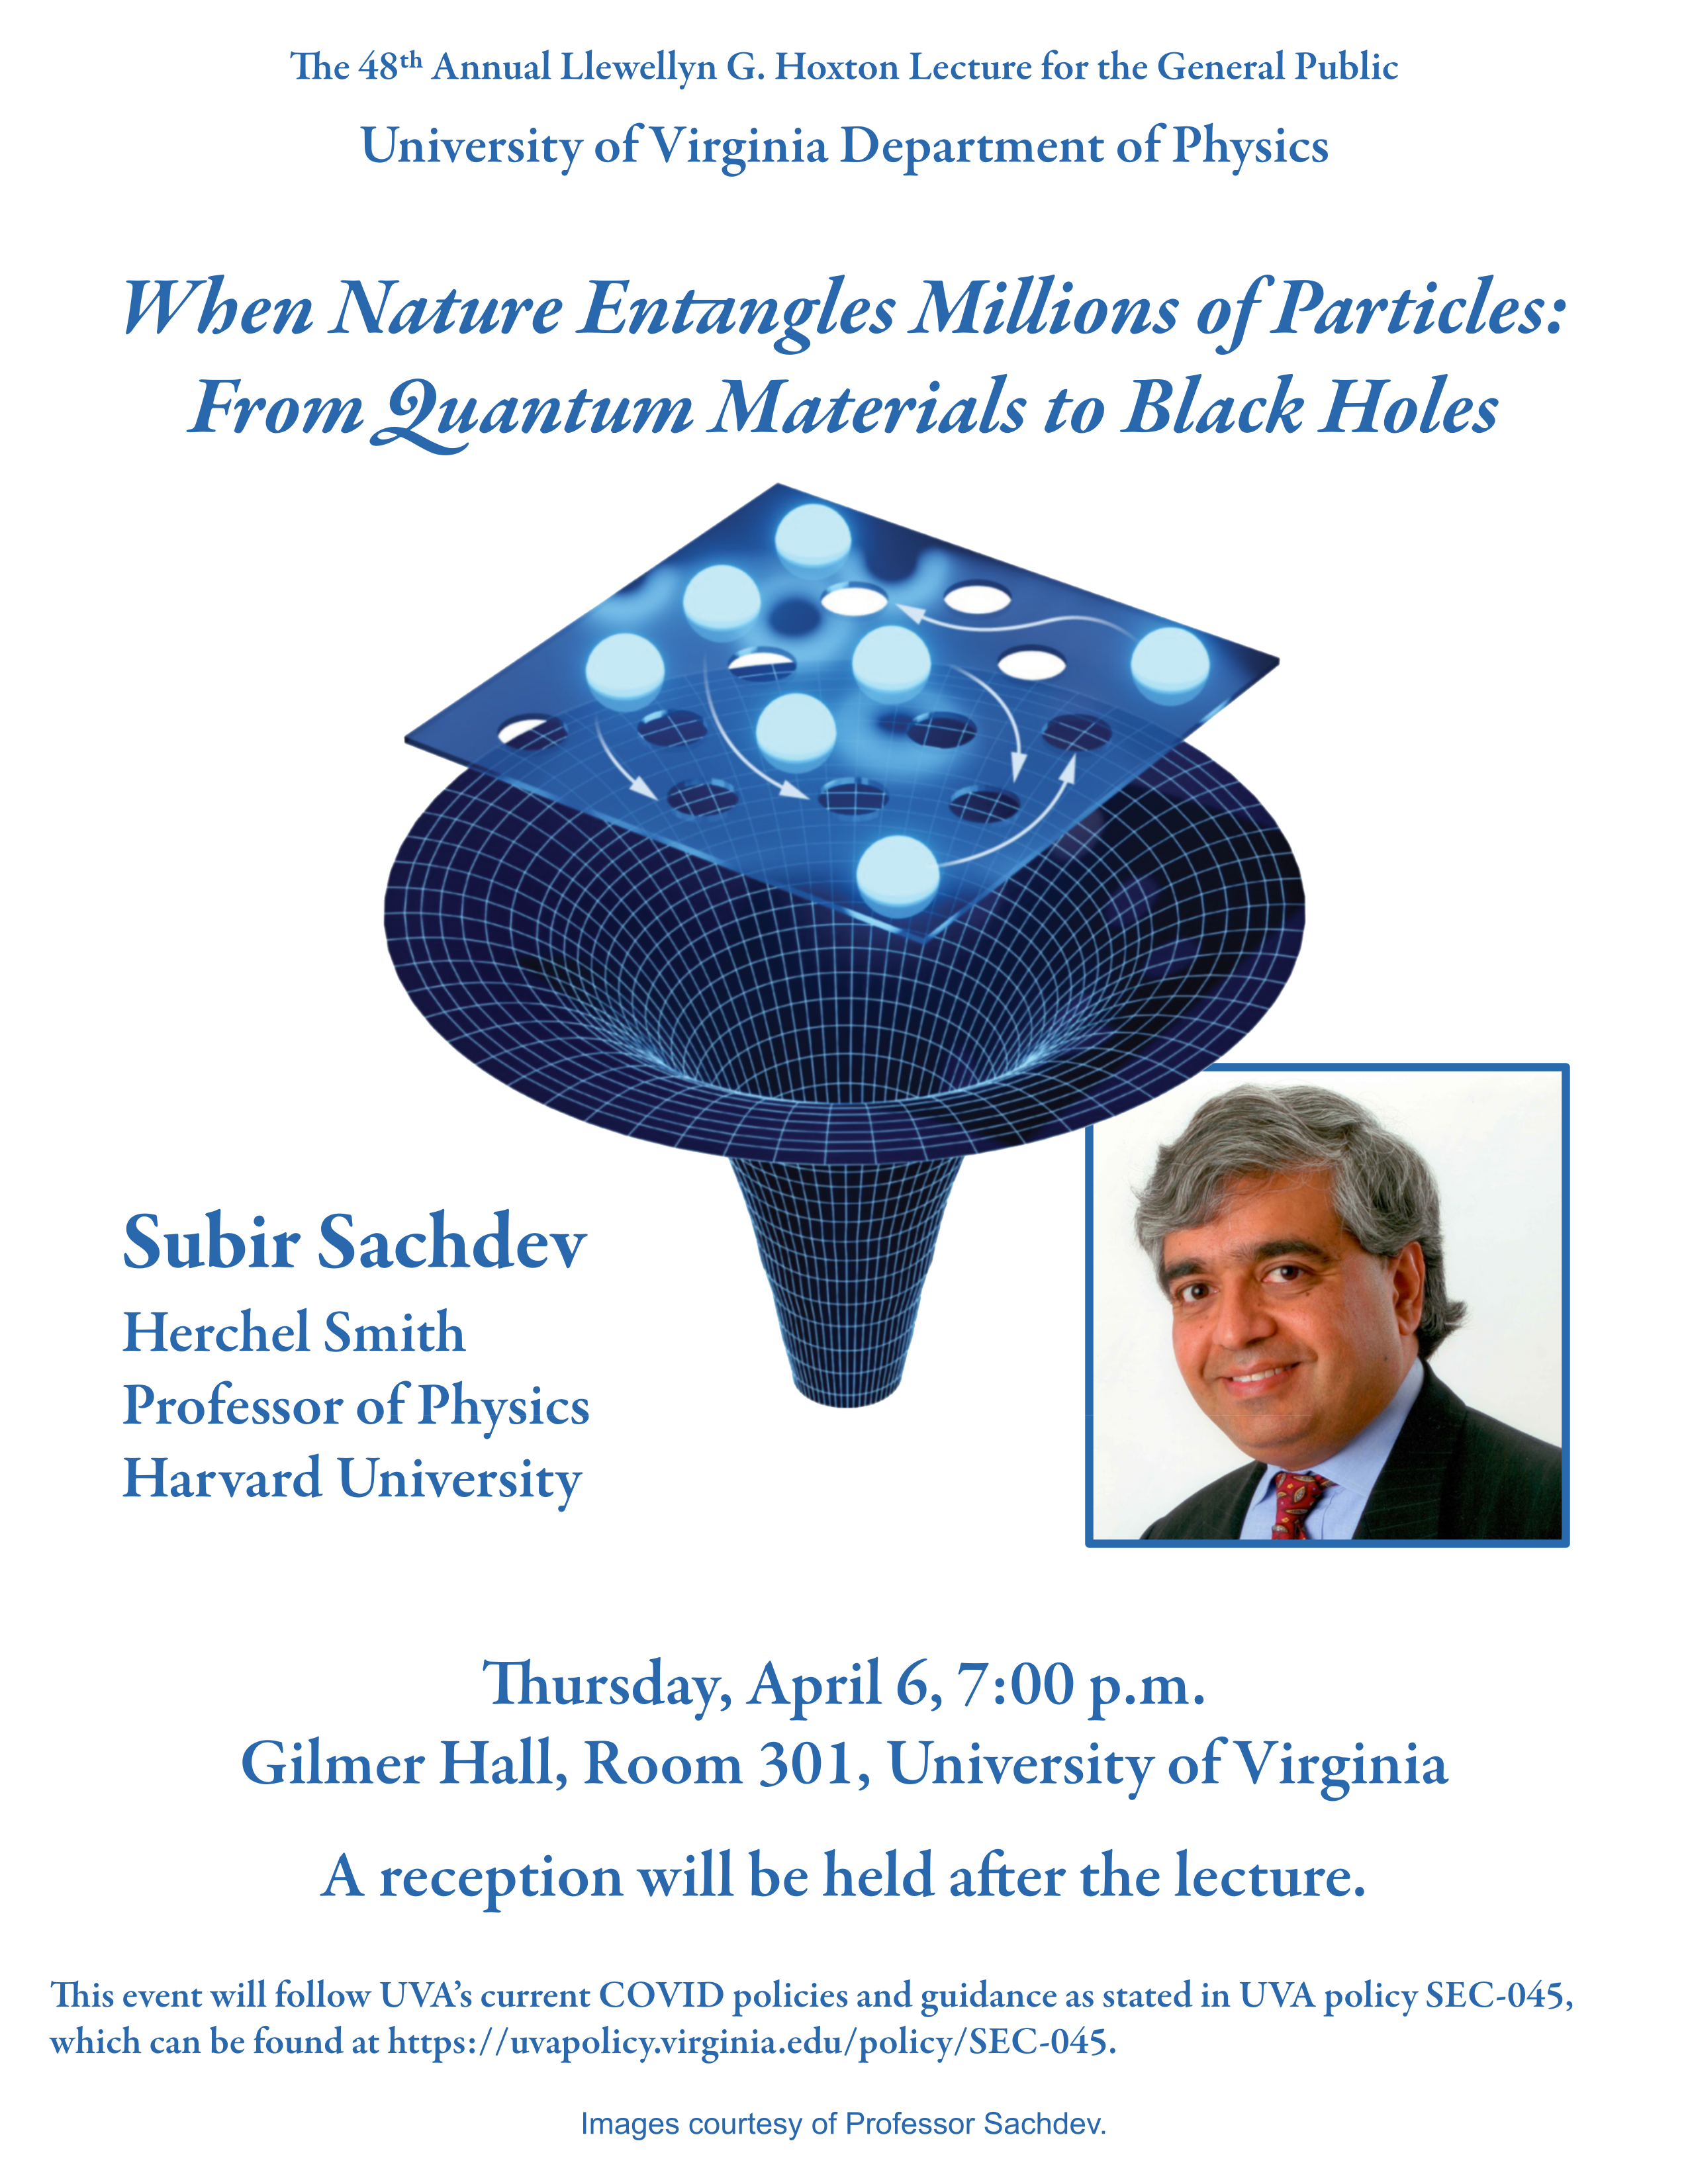 The 48th Annual Llewellyn G.Hoxton Lecture for the General Public  Subir Sachdev Herchel Smith Professor of Physics Harvard University  Thursday, April 6, 7:00 p.m. GilmerHall, Room301, University of Virginia A reception will be held after the lecture.  This event will follow UVAÃÂÃÂÃÂÃÂÃÂÃÂÃÂÃÂ¢ÃÂÃÂÃÂÃÂÃÂÃÂÃÂÃÂÃÂÃÂÃÂÃÂÃÂÃÂÃÂÃÂs current COVID policies and guidance as stated in UVA policy SEC-045, which can be found at https://uvapolicy.virginia.edu/policy/SEC-045.